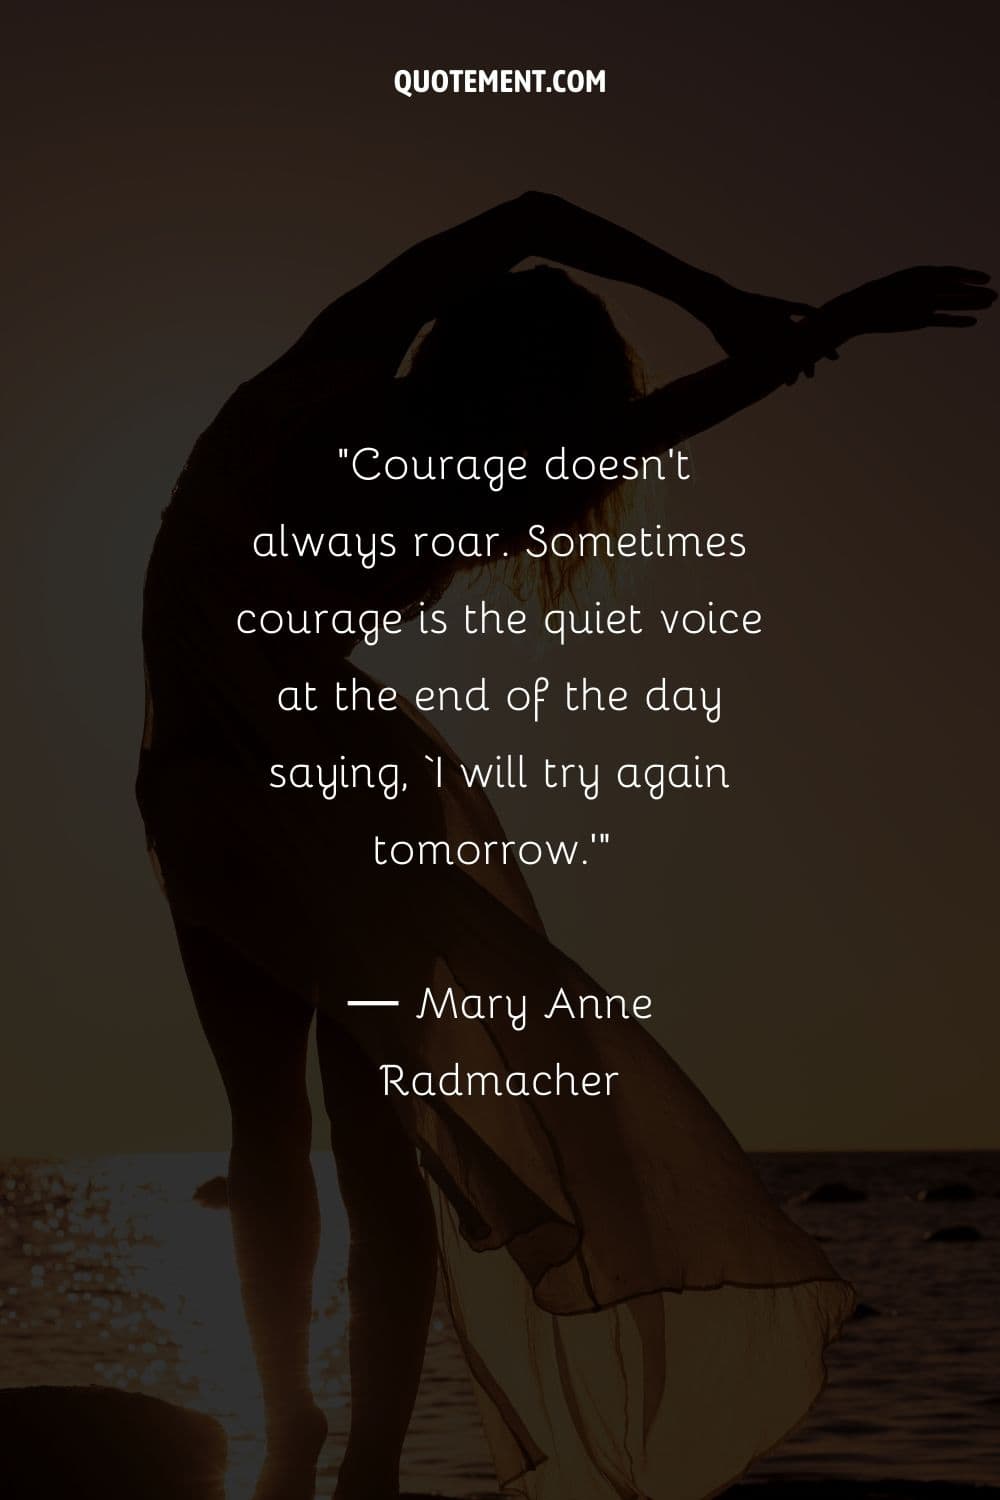 Courage doesn’t always roar. Sometimes courage is the quiet voice at the end of the day saying, ‘I will try again tomorrow